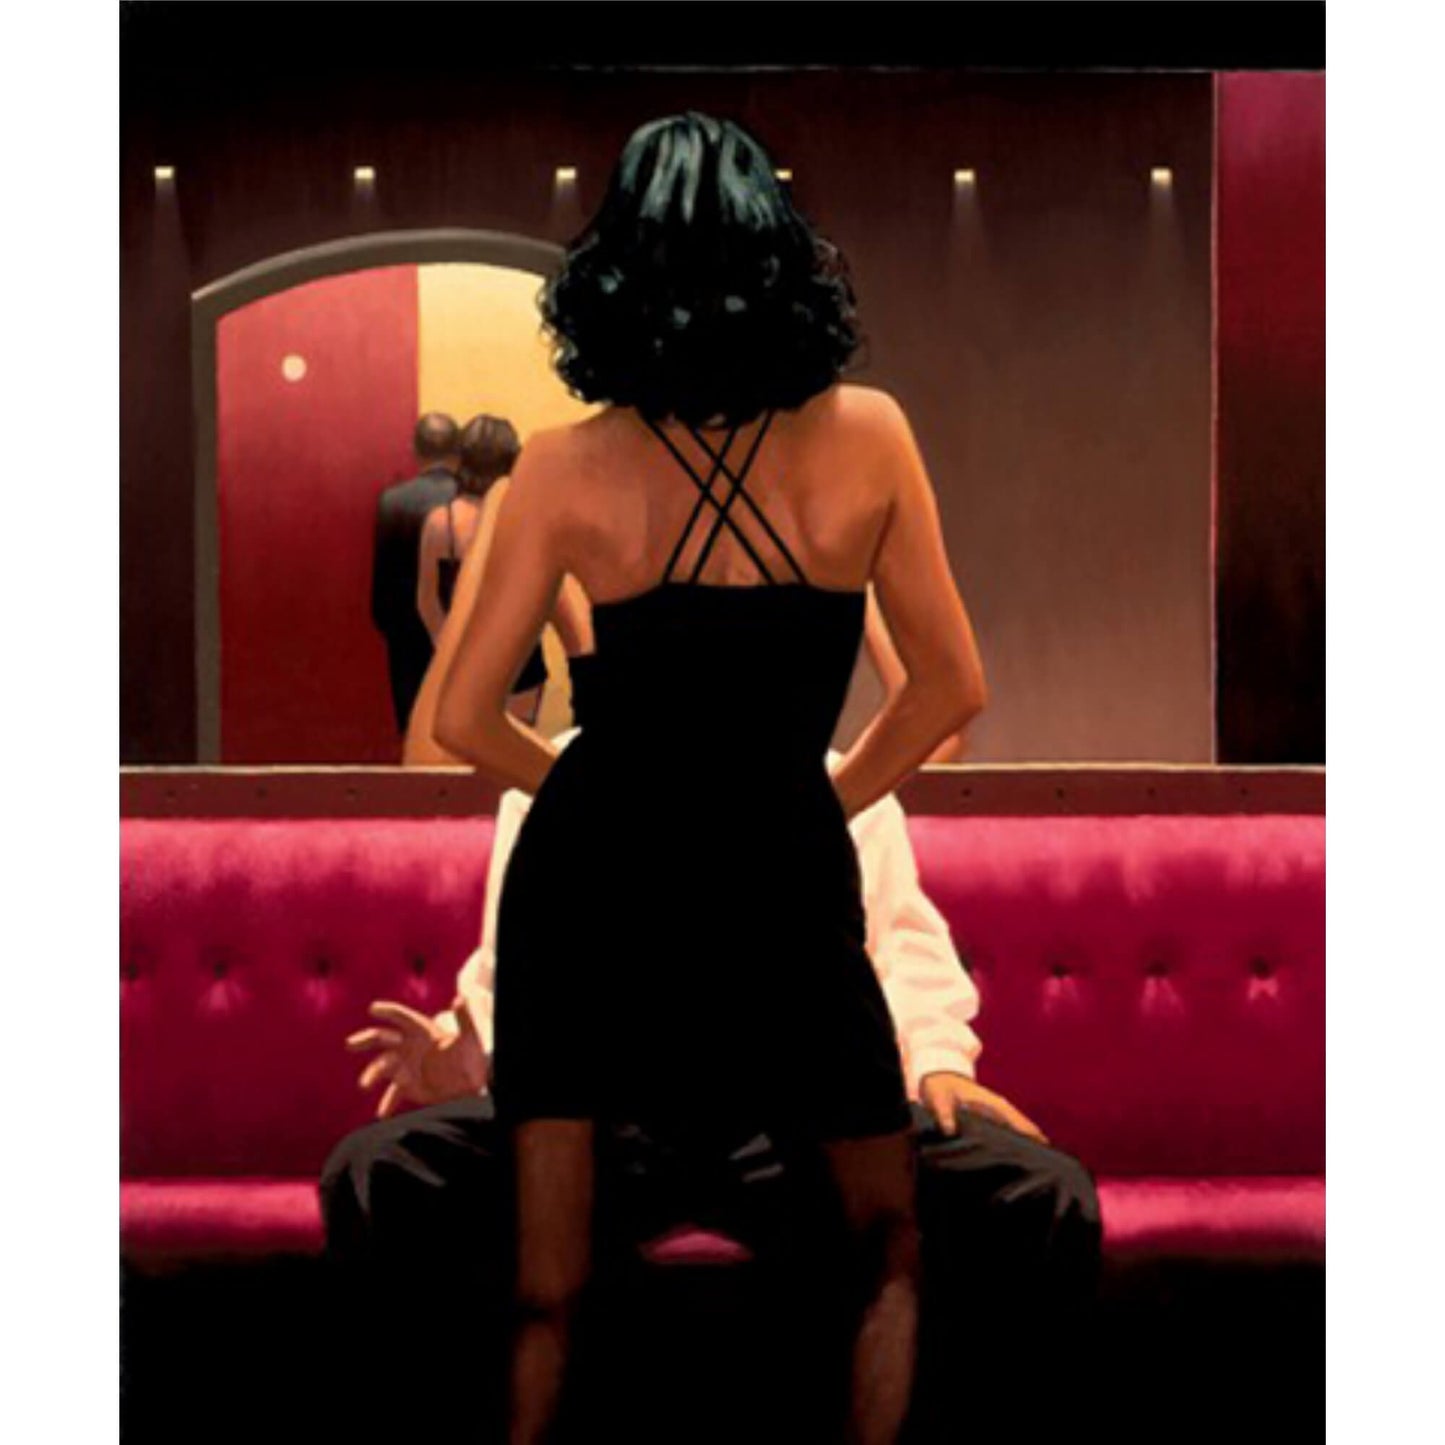 Pincer Movement by Jack Vettriano